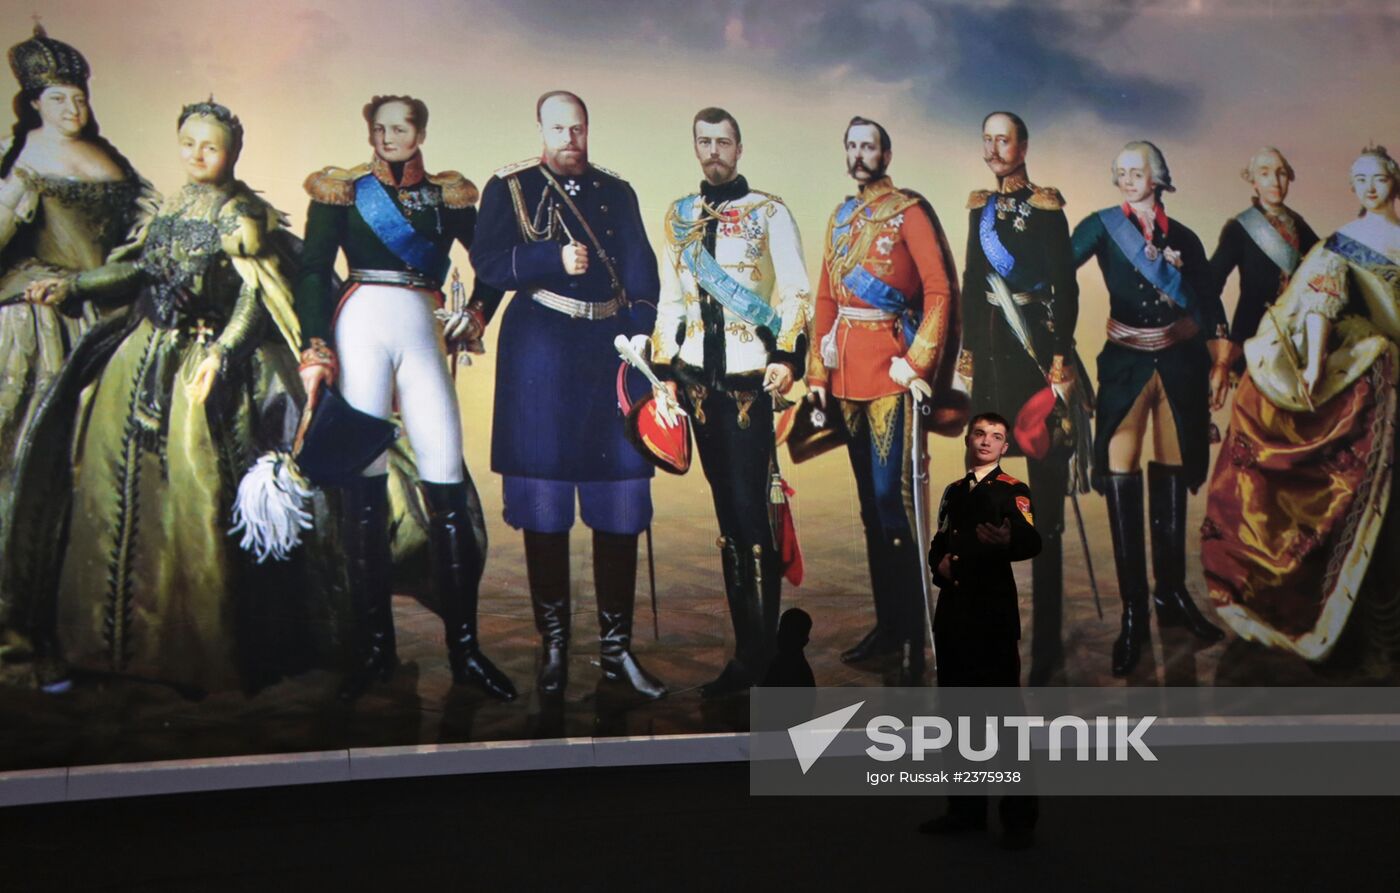 Interactive exhibition "The Romanovs. My History" in St. Petersburg